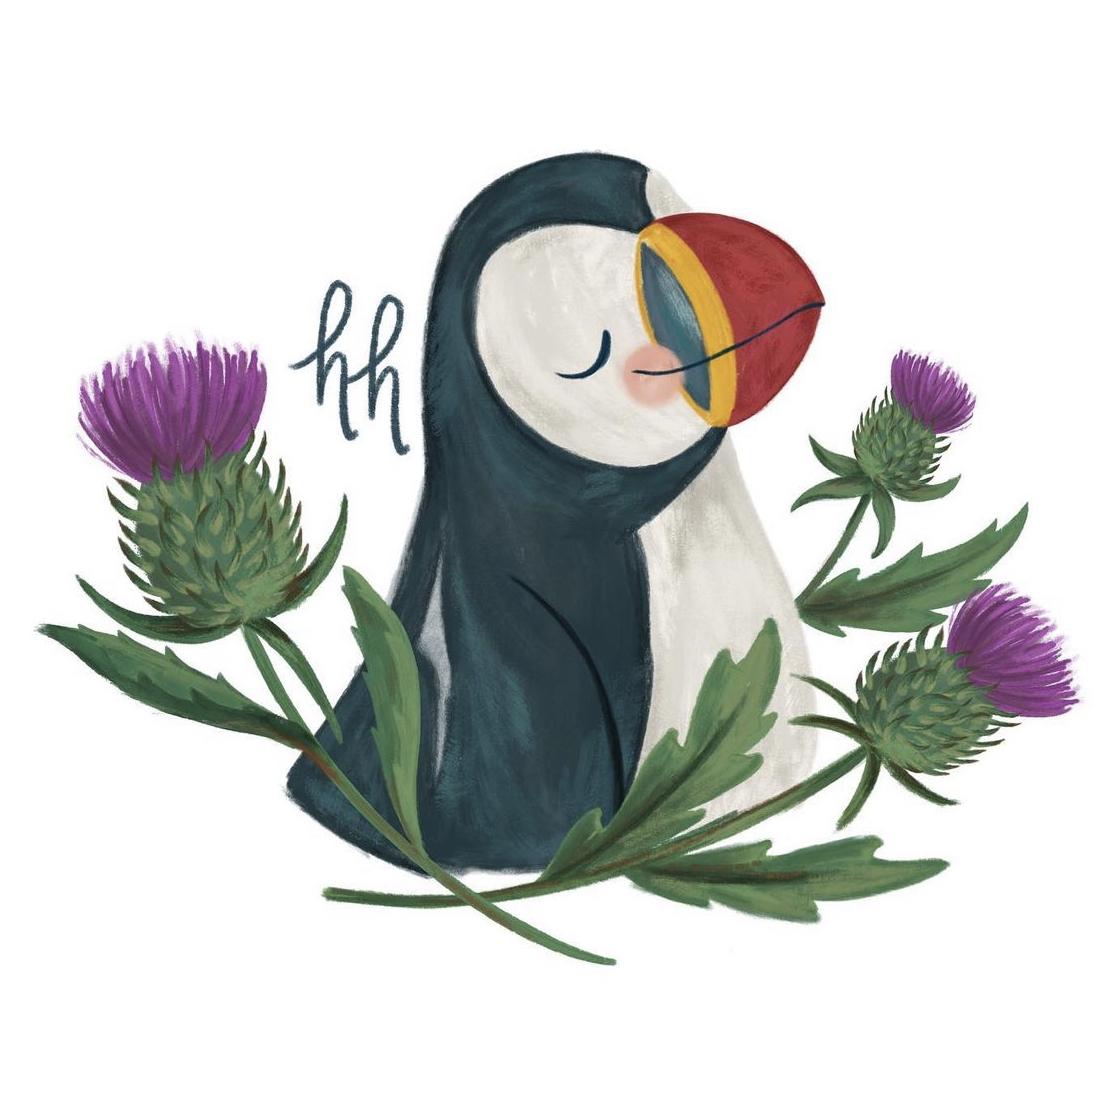 Puffin+Thistle's images